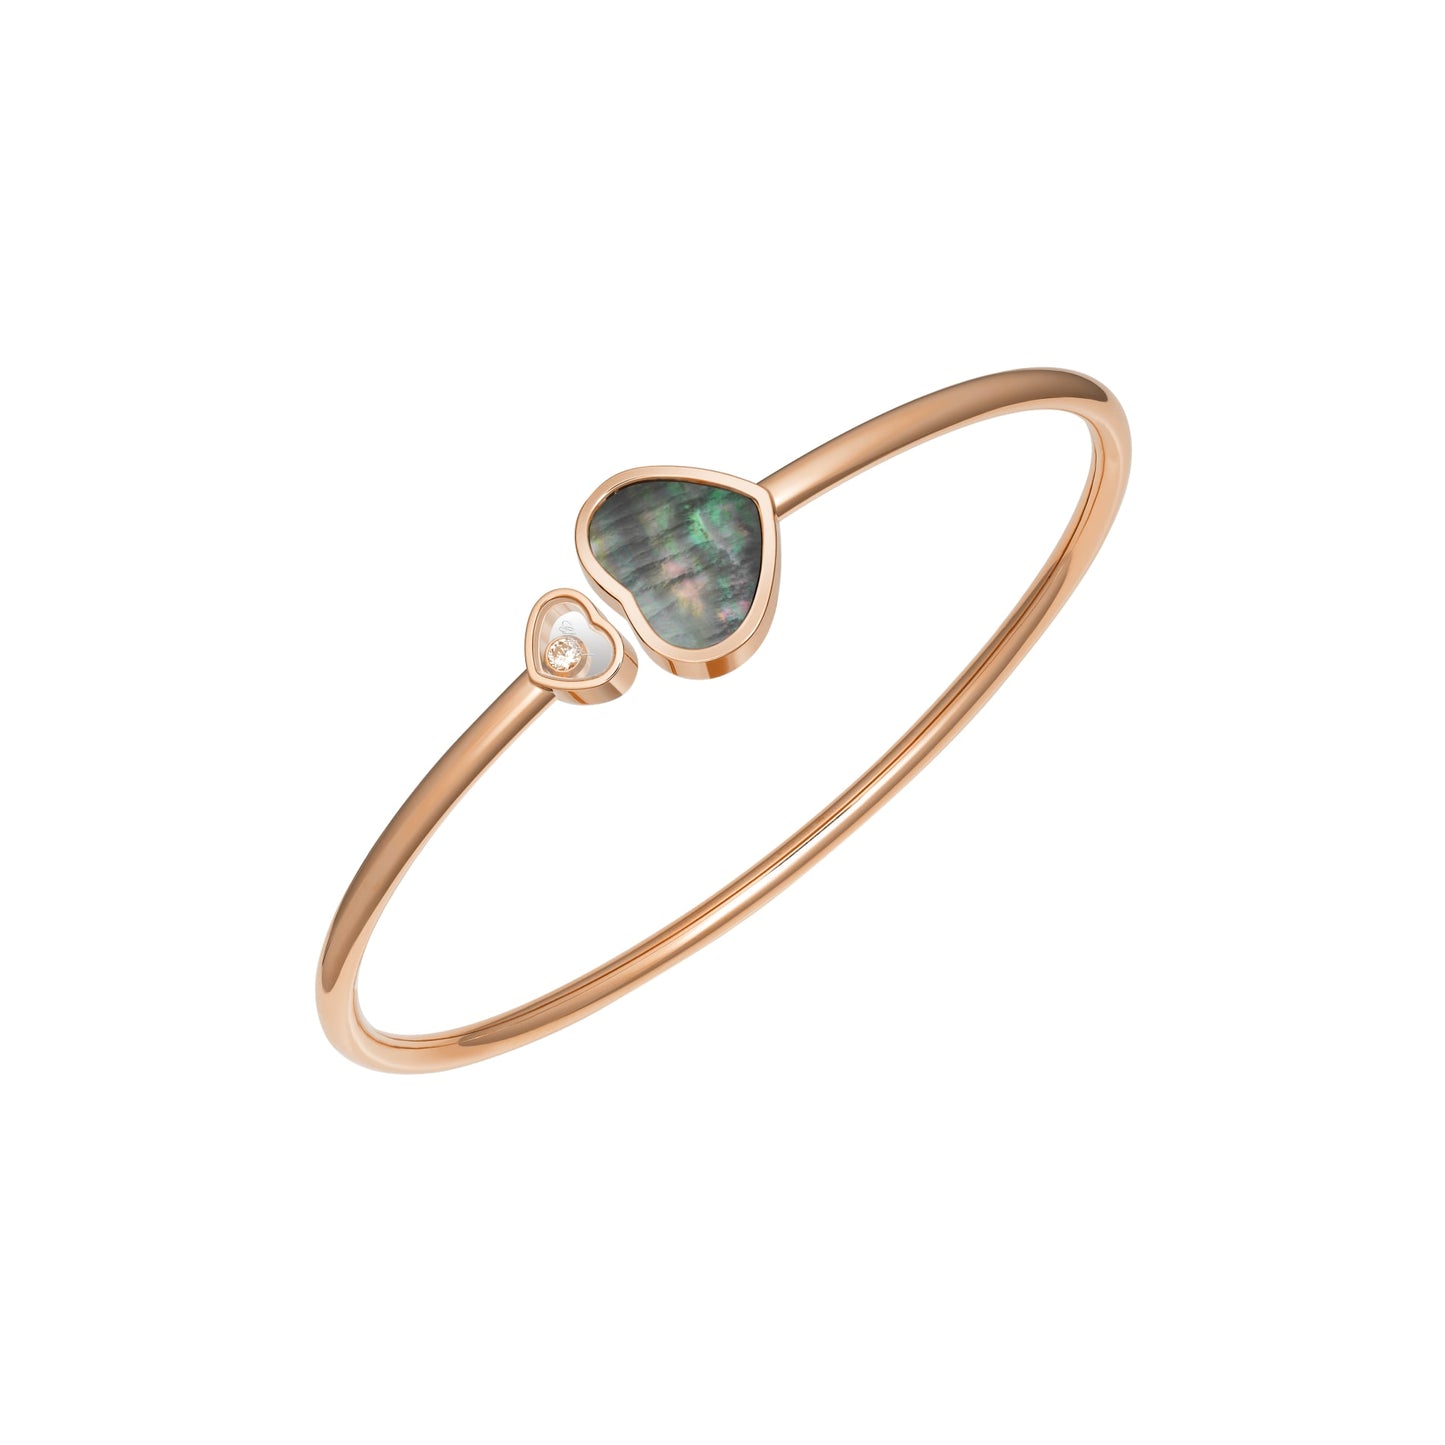 HAPPY HEARTS BANGLE, ETHICAL ROSE GOLD, DIAMOND, BLACK TAHITIAN MOTHER-OF-PEARL 857482-5310